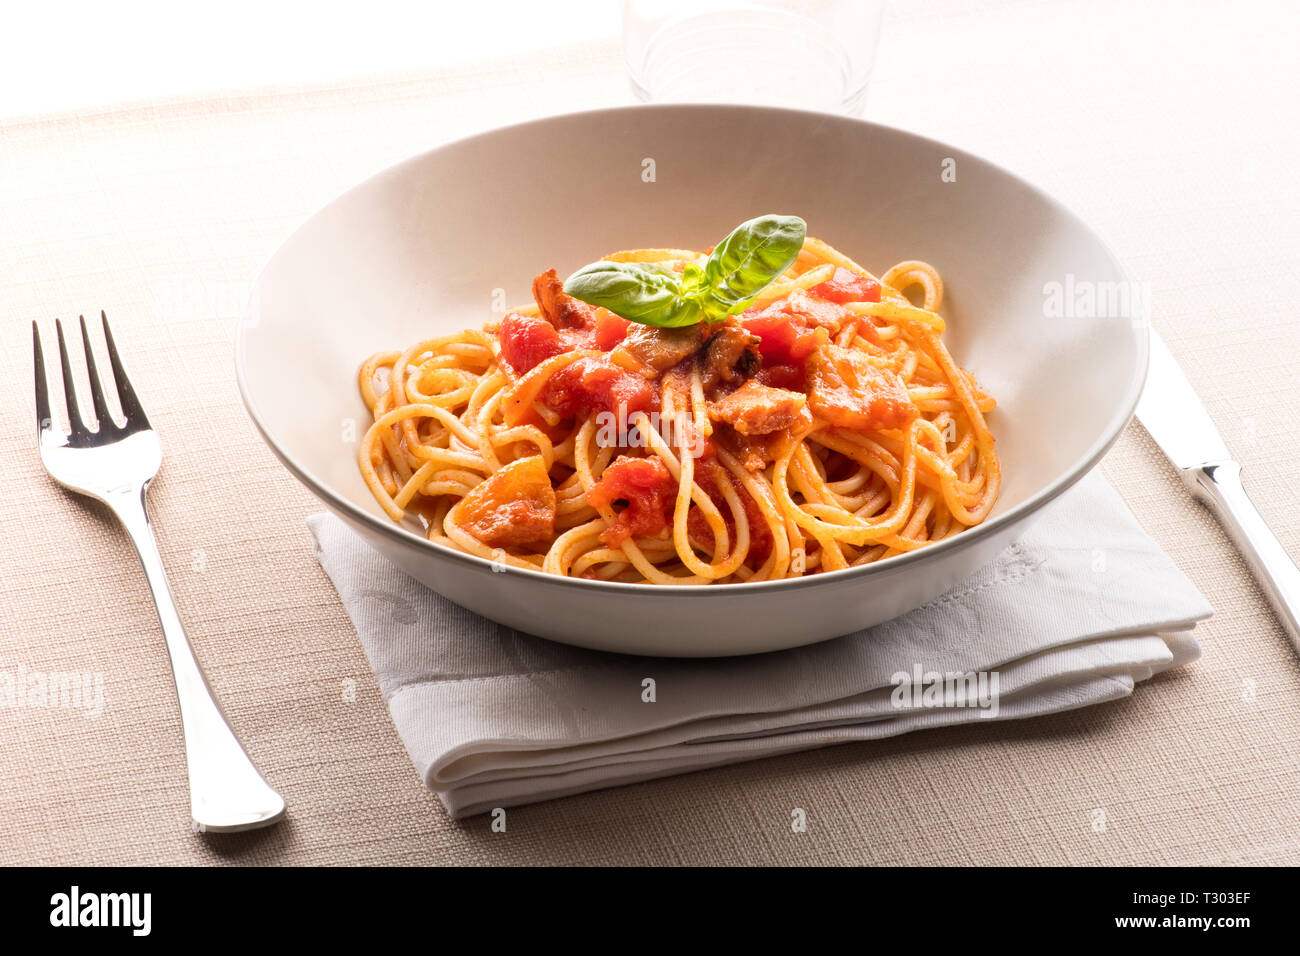 Spaghetti all' amatriciana from the Lazio region of Italy with pecorino cheese, pepper, tomato, cured pork jowl or guanciale served in a bowl as a fir Stock Photo